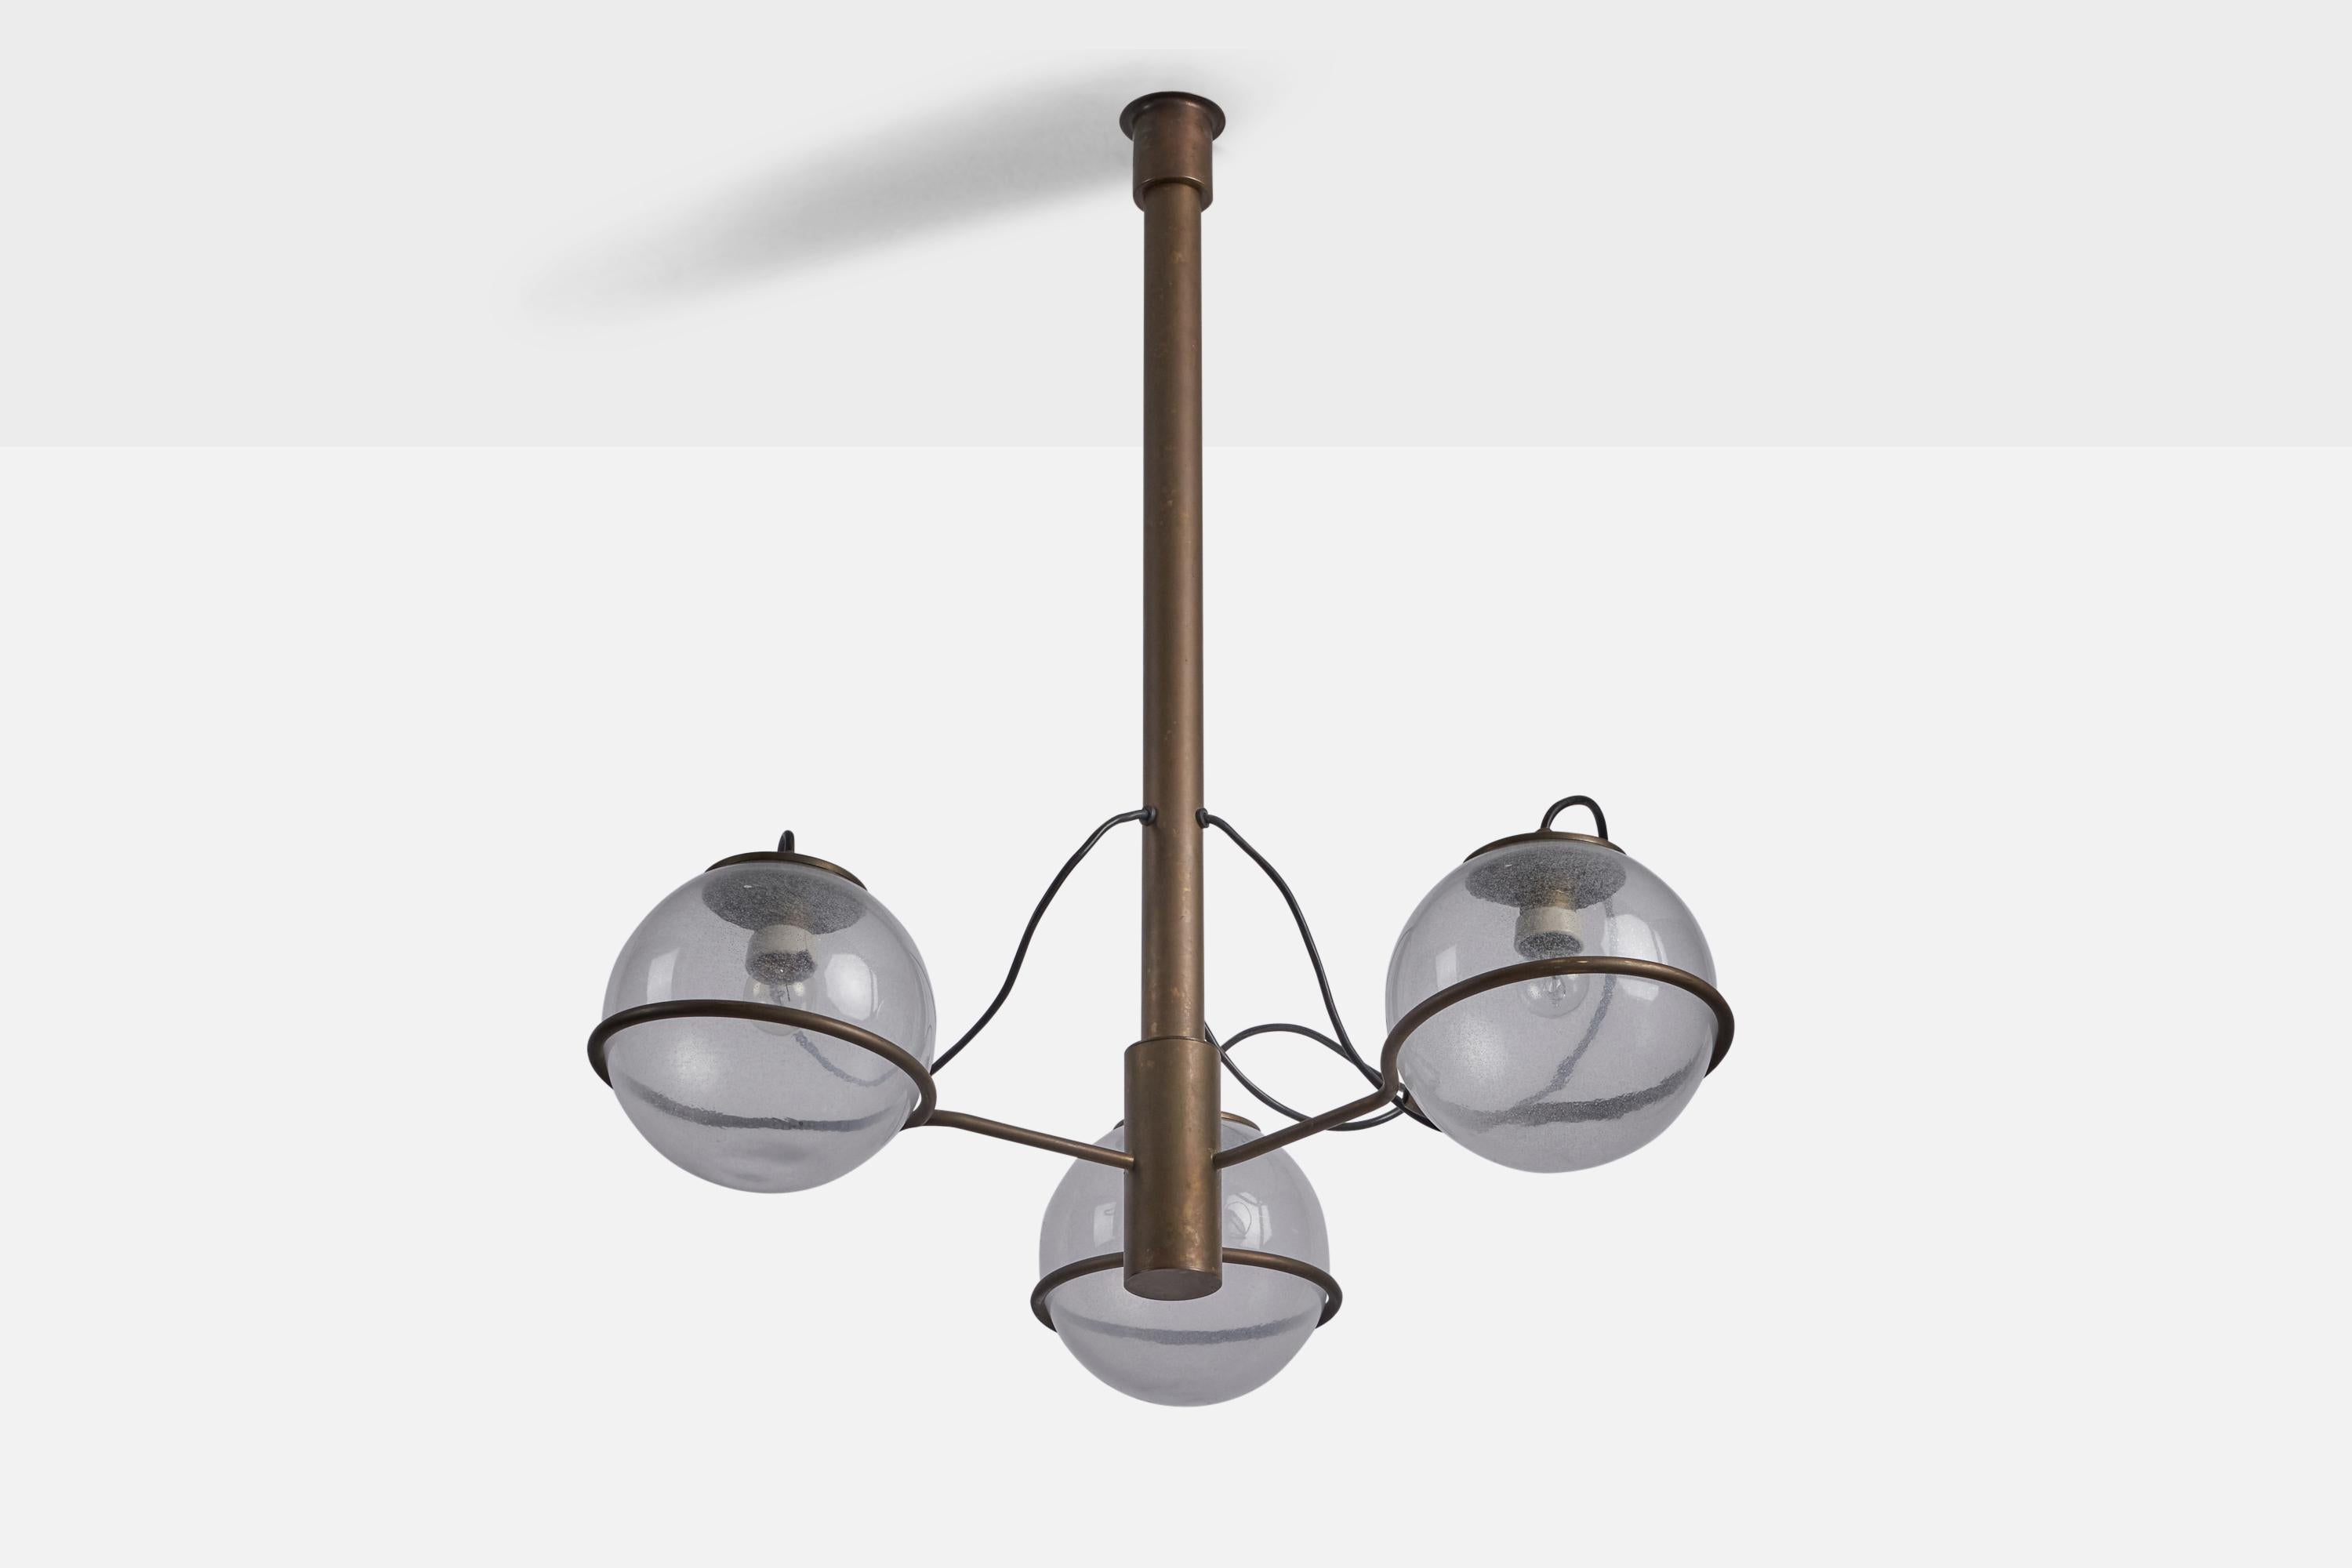 A three-armed brass and glass chandelier attributed to Gino Sarfatti, Italy, 1960s.

Overall Dimensions (inches): 33.5” H x 27” Diameter
Bulb Specifications: E-26 Bulb
Number of Sockets: 3